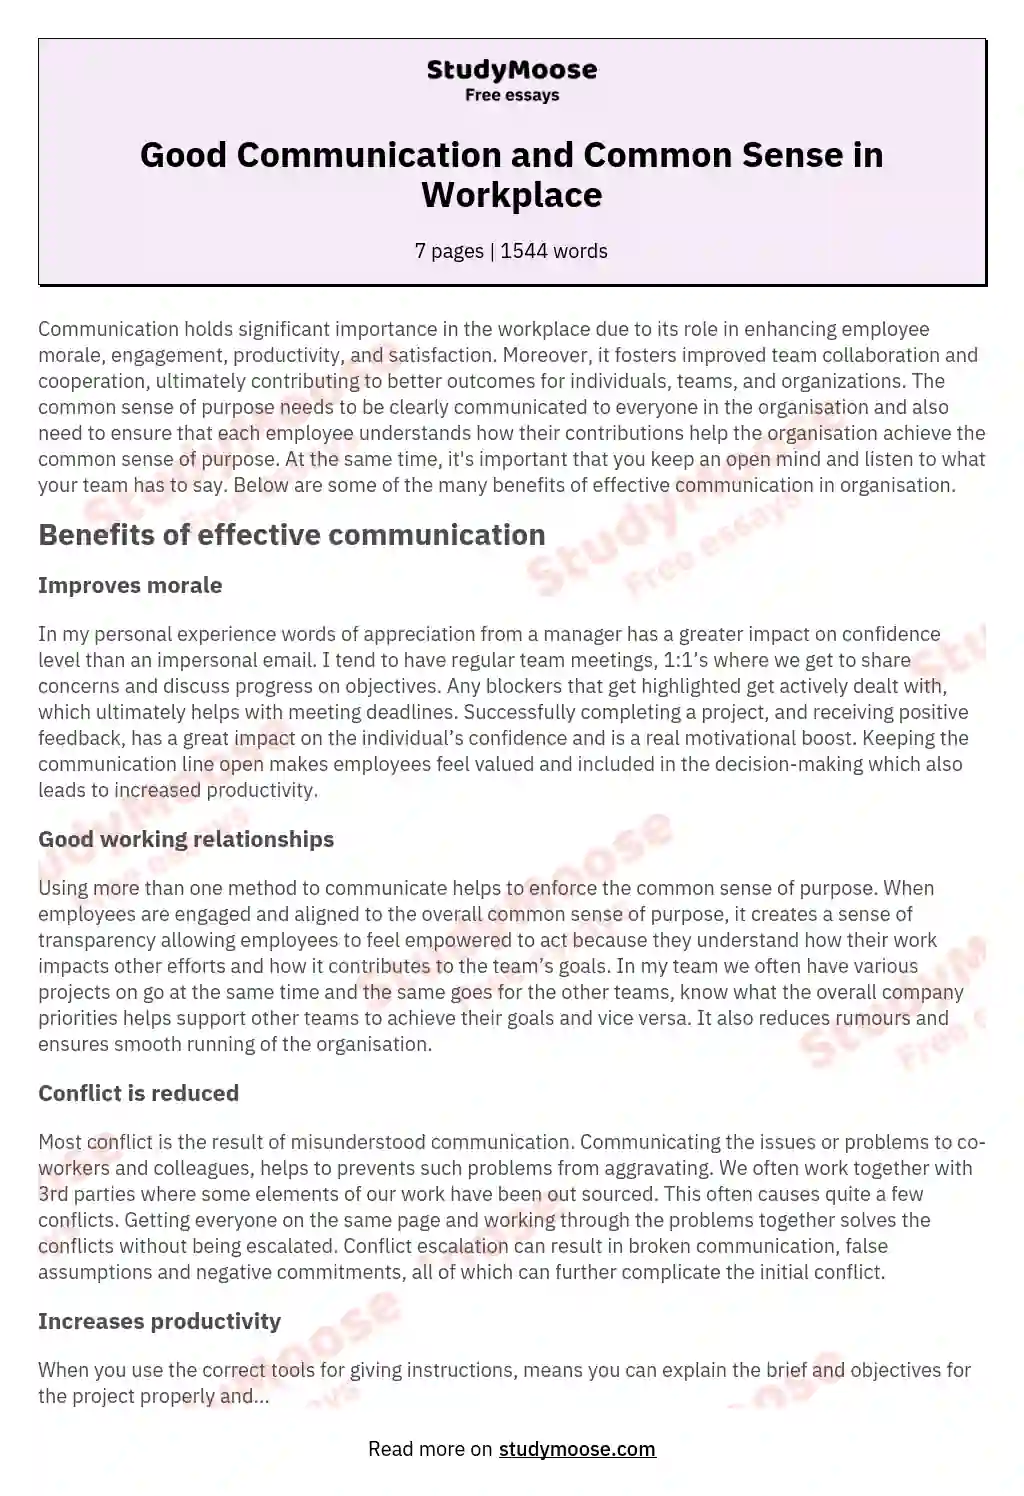 Good Communication and Common Sense in Workplace essay